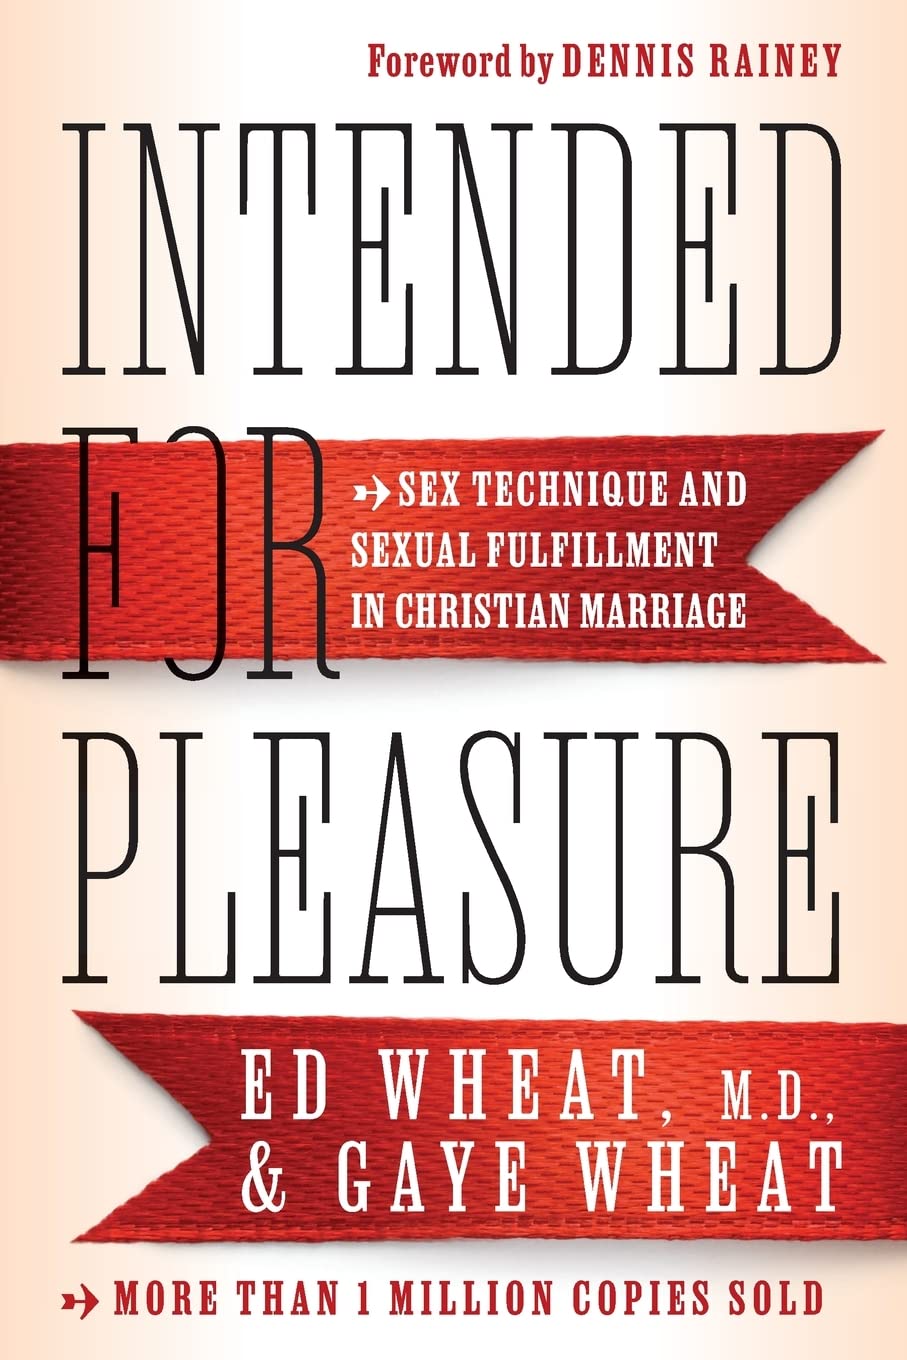 intended for pleasure marriage book